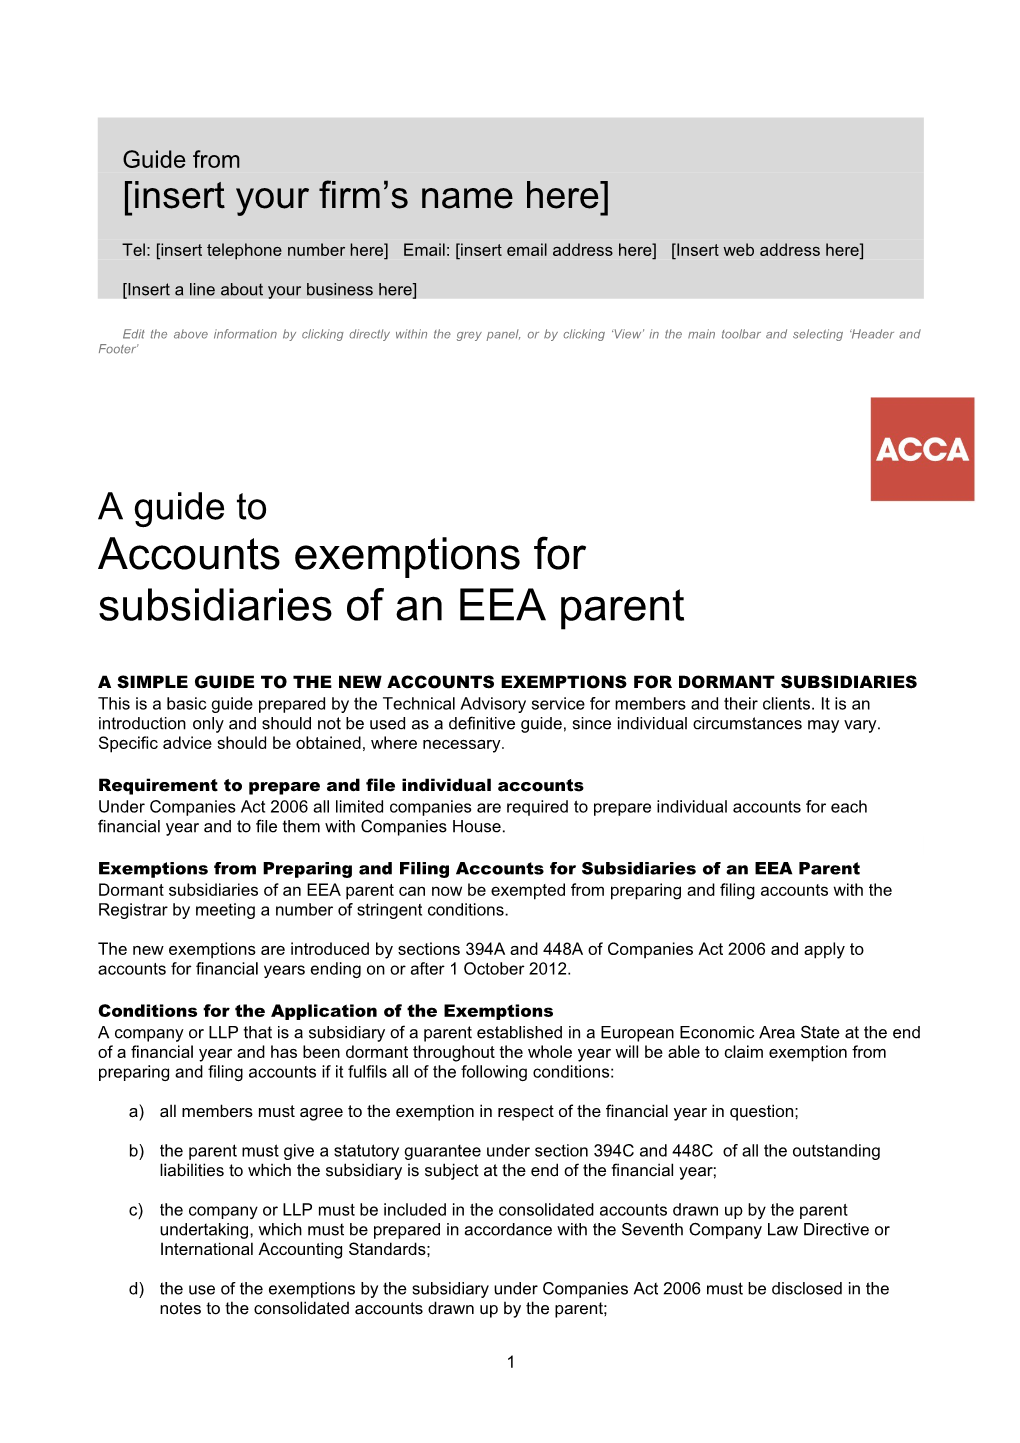 A Simple Guide to the New Accounts Exemptions for Dormant Subsidiaries